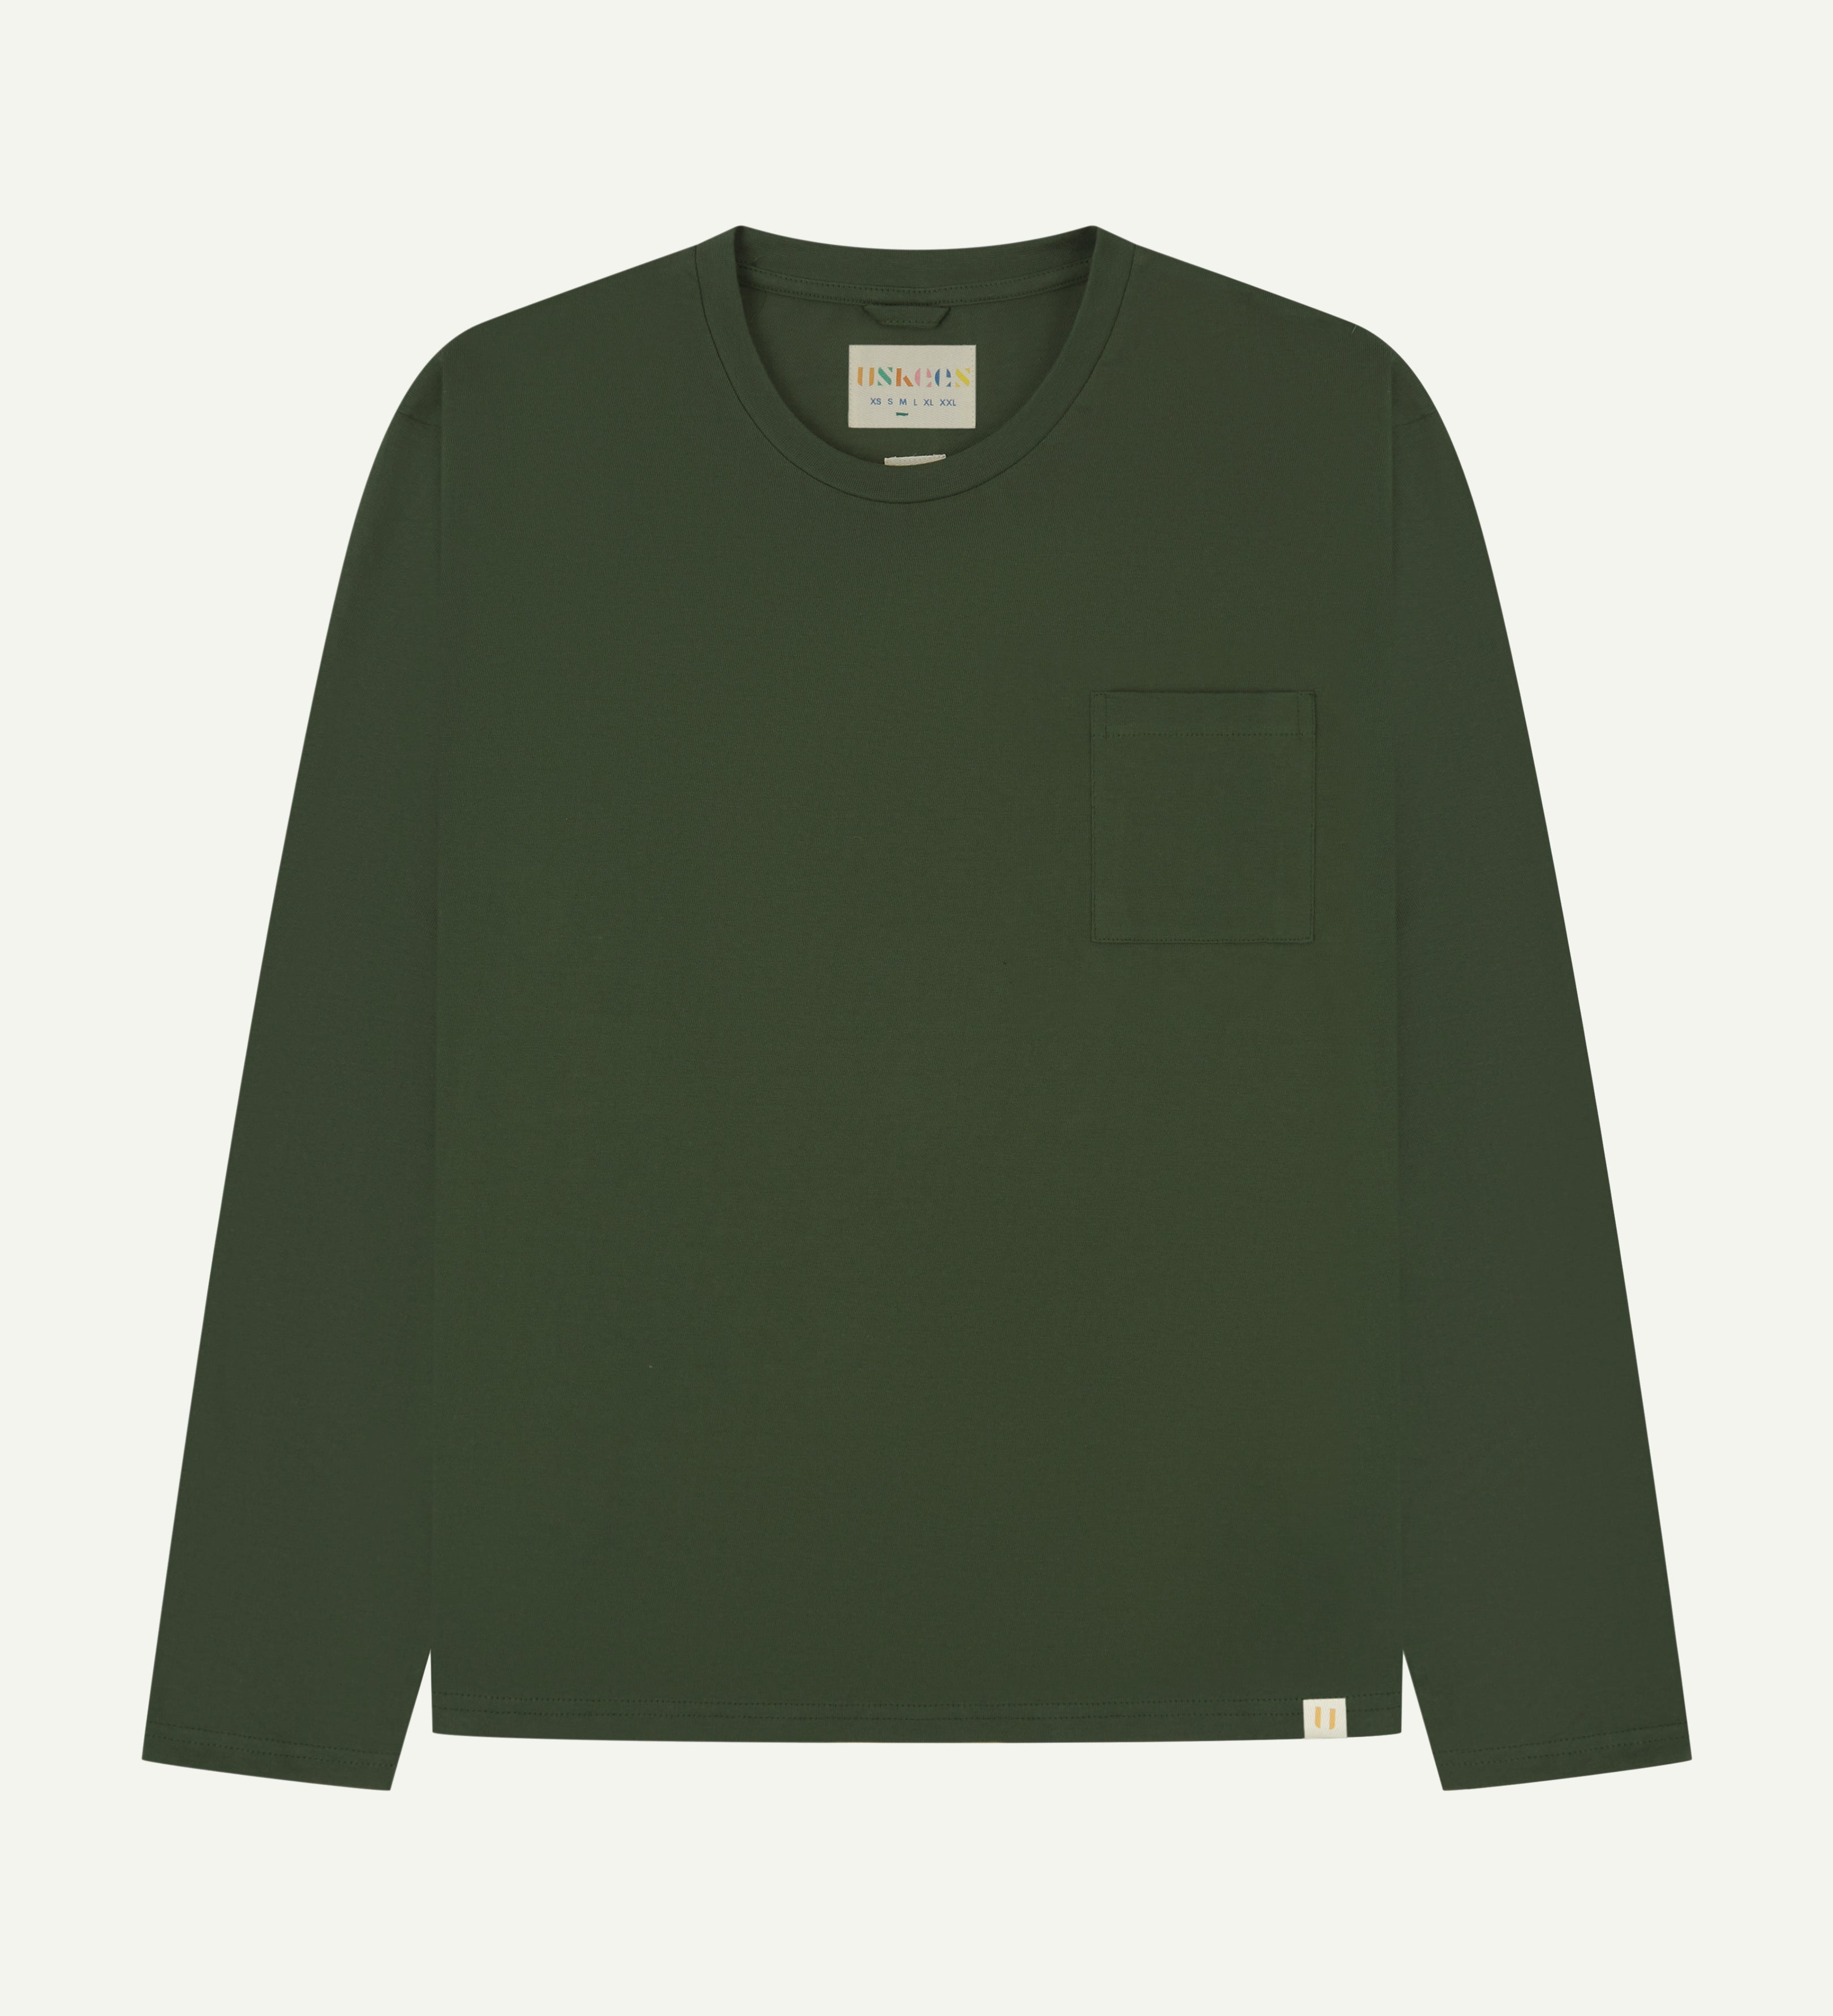 Front flat shot of long sleeve Uskees t-shirt in coriander green showing breast pocket and discreet Uskees branding at hem